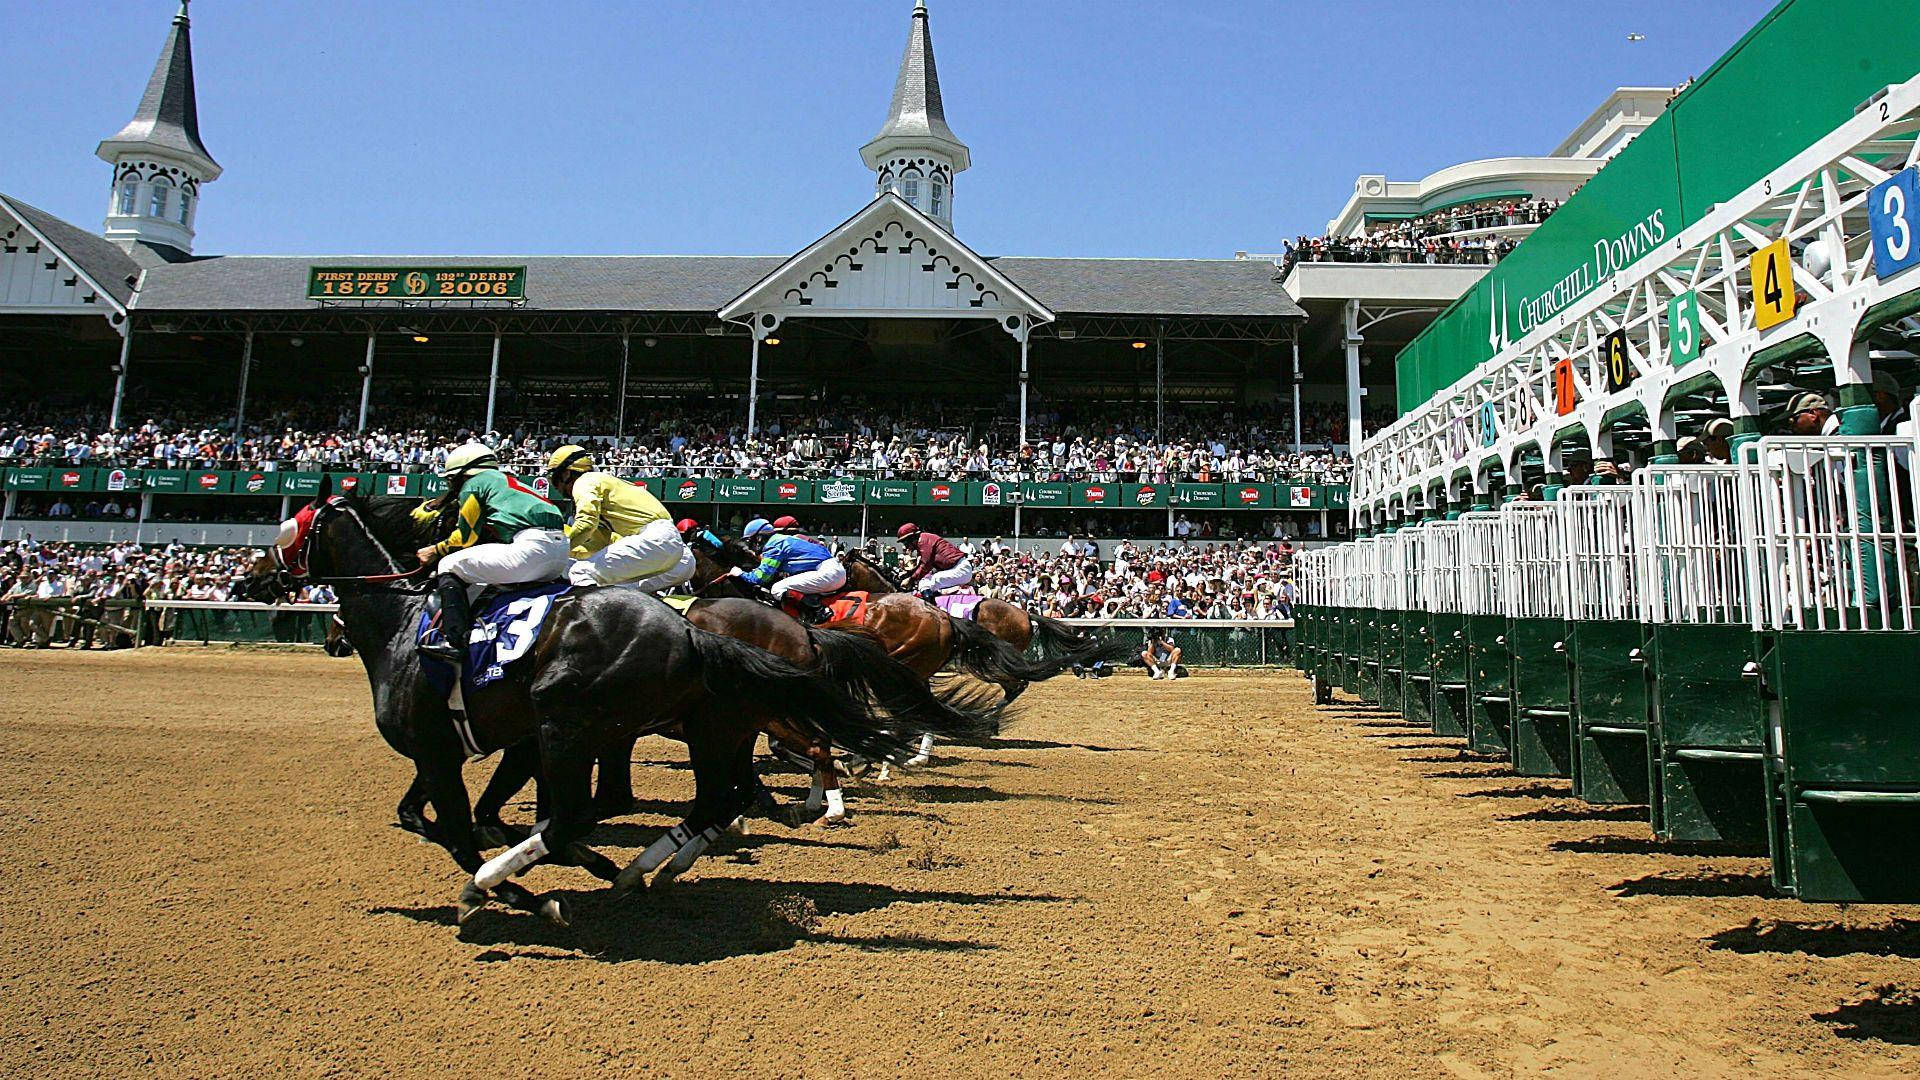 Exciting Moments Captured at the Kentucky Derby Horse Race Festival. Wallpaper